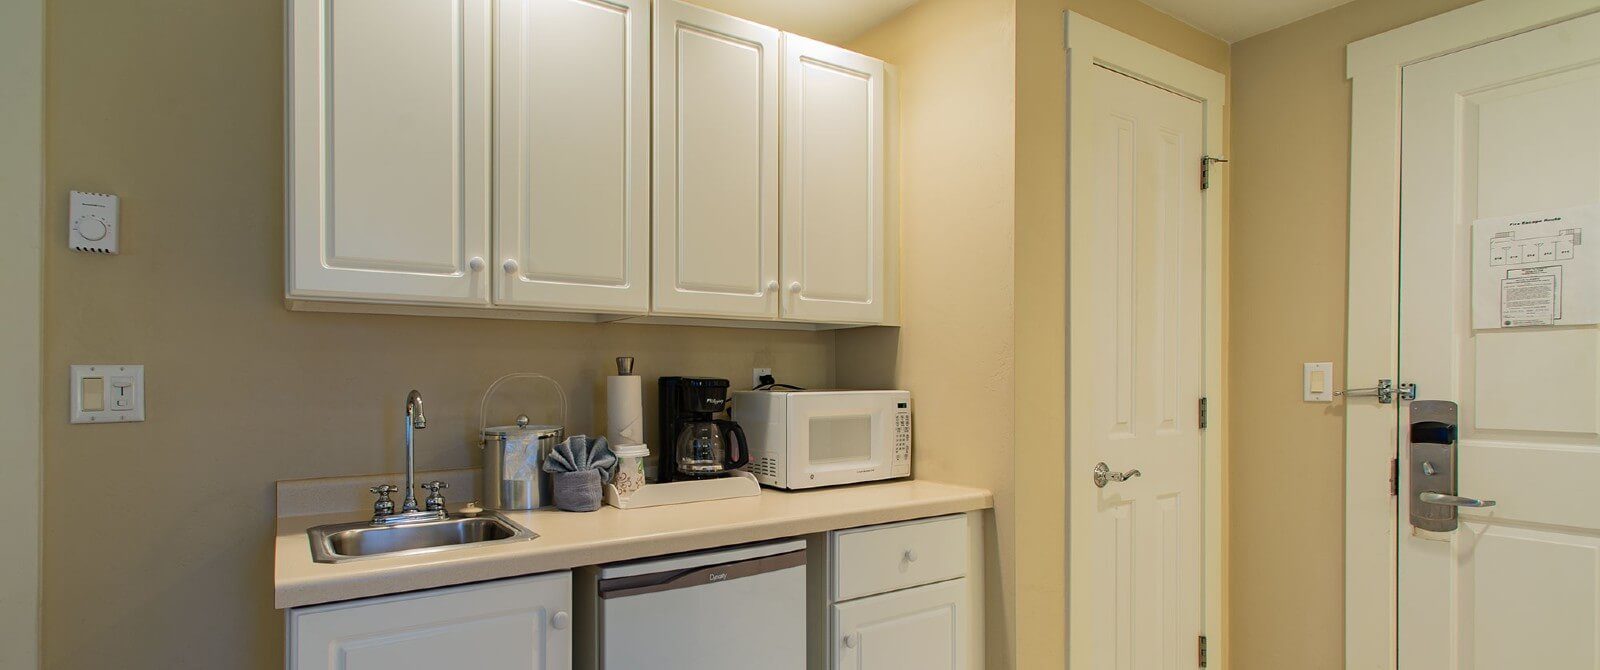 White kitchenette with upper and lower cabinets, microwave, coffee maker and sink